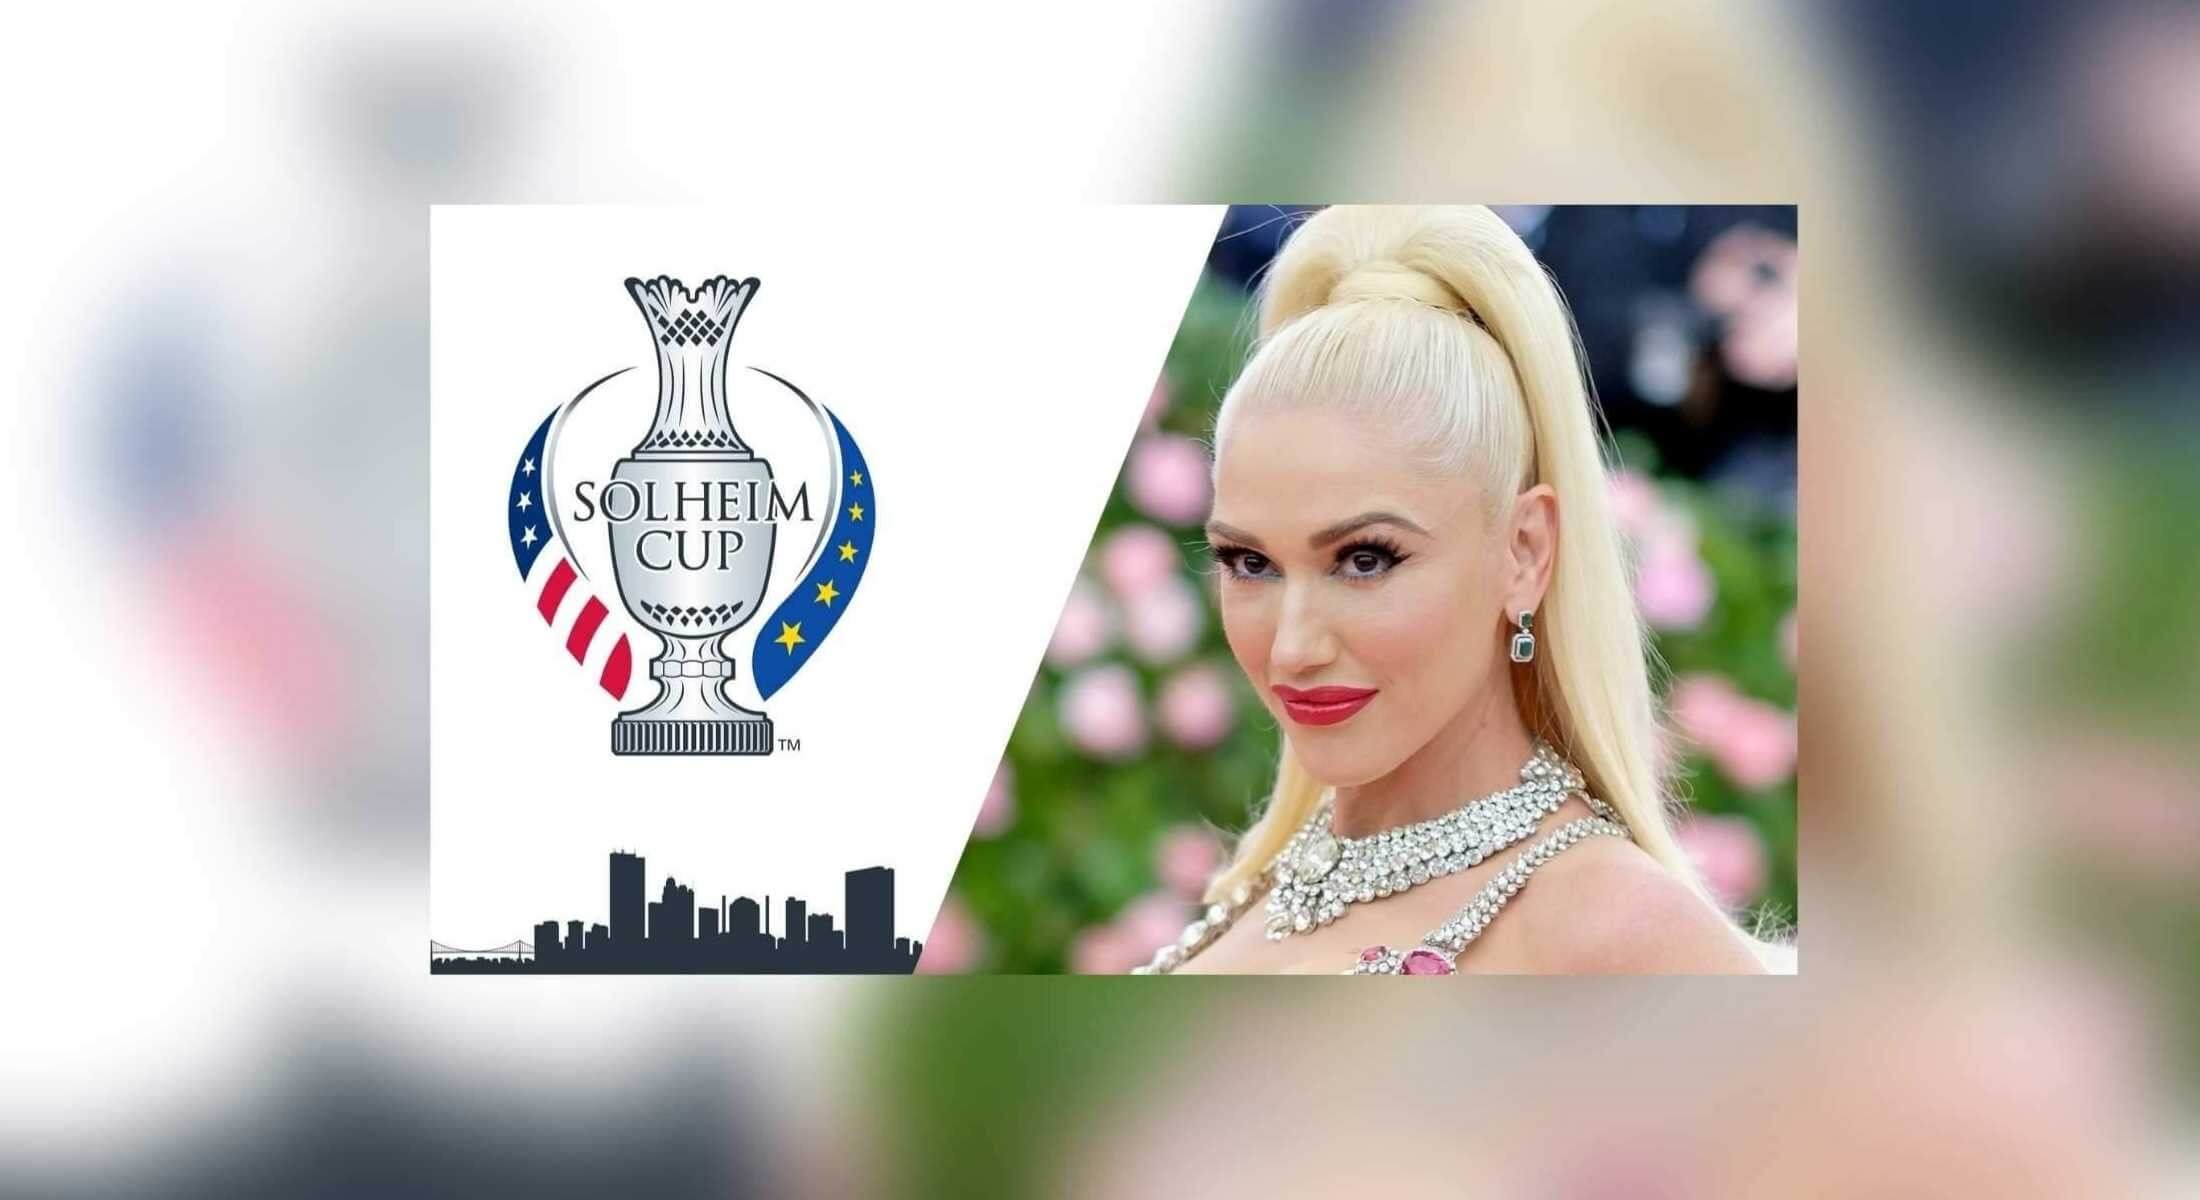 Solheim Cup Opening Ceremony Celebration 2021